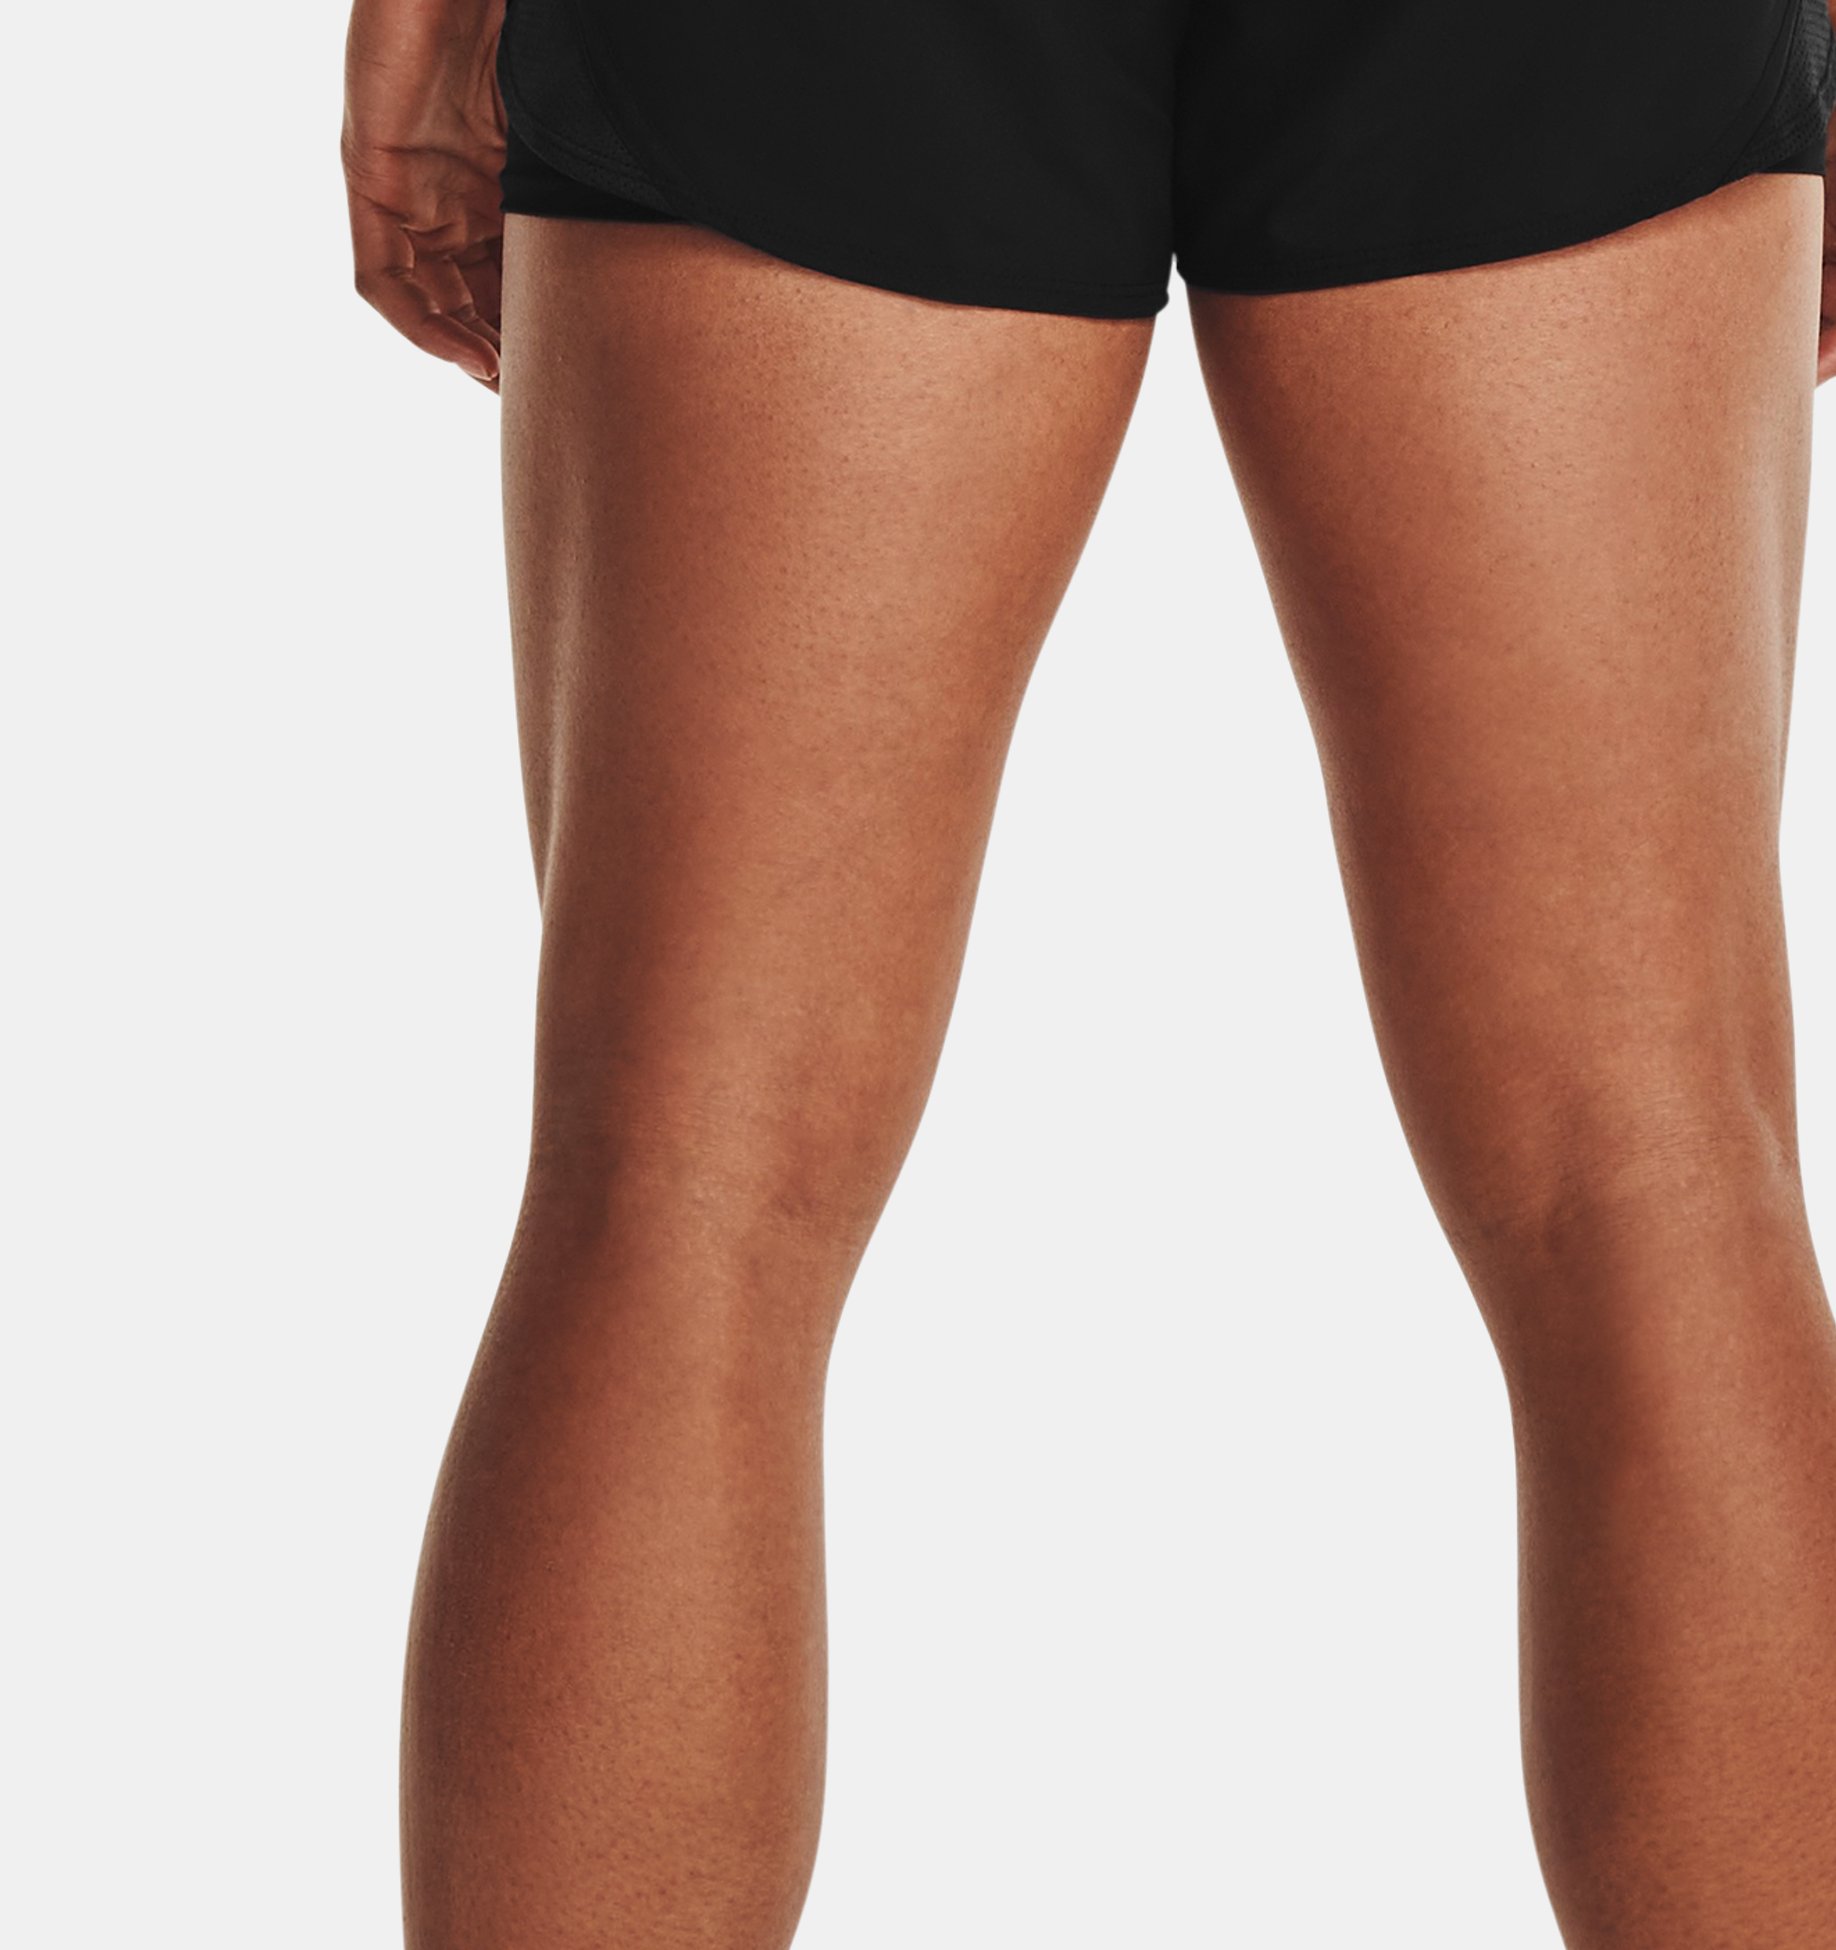 Women's UA Fly-By 2.0 2-in-1 Shorts | Under Armour